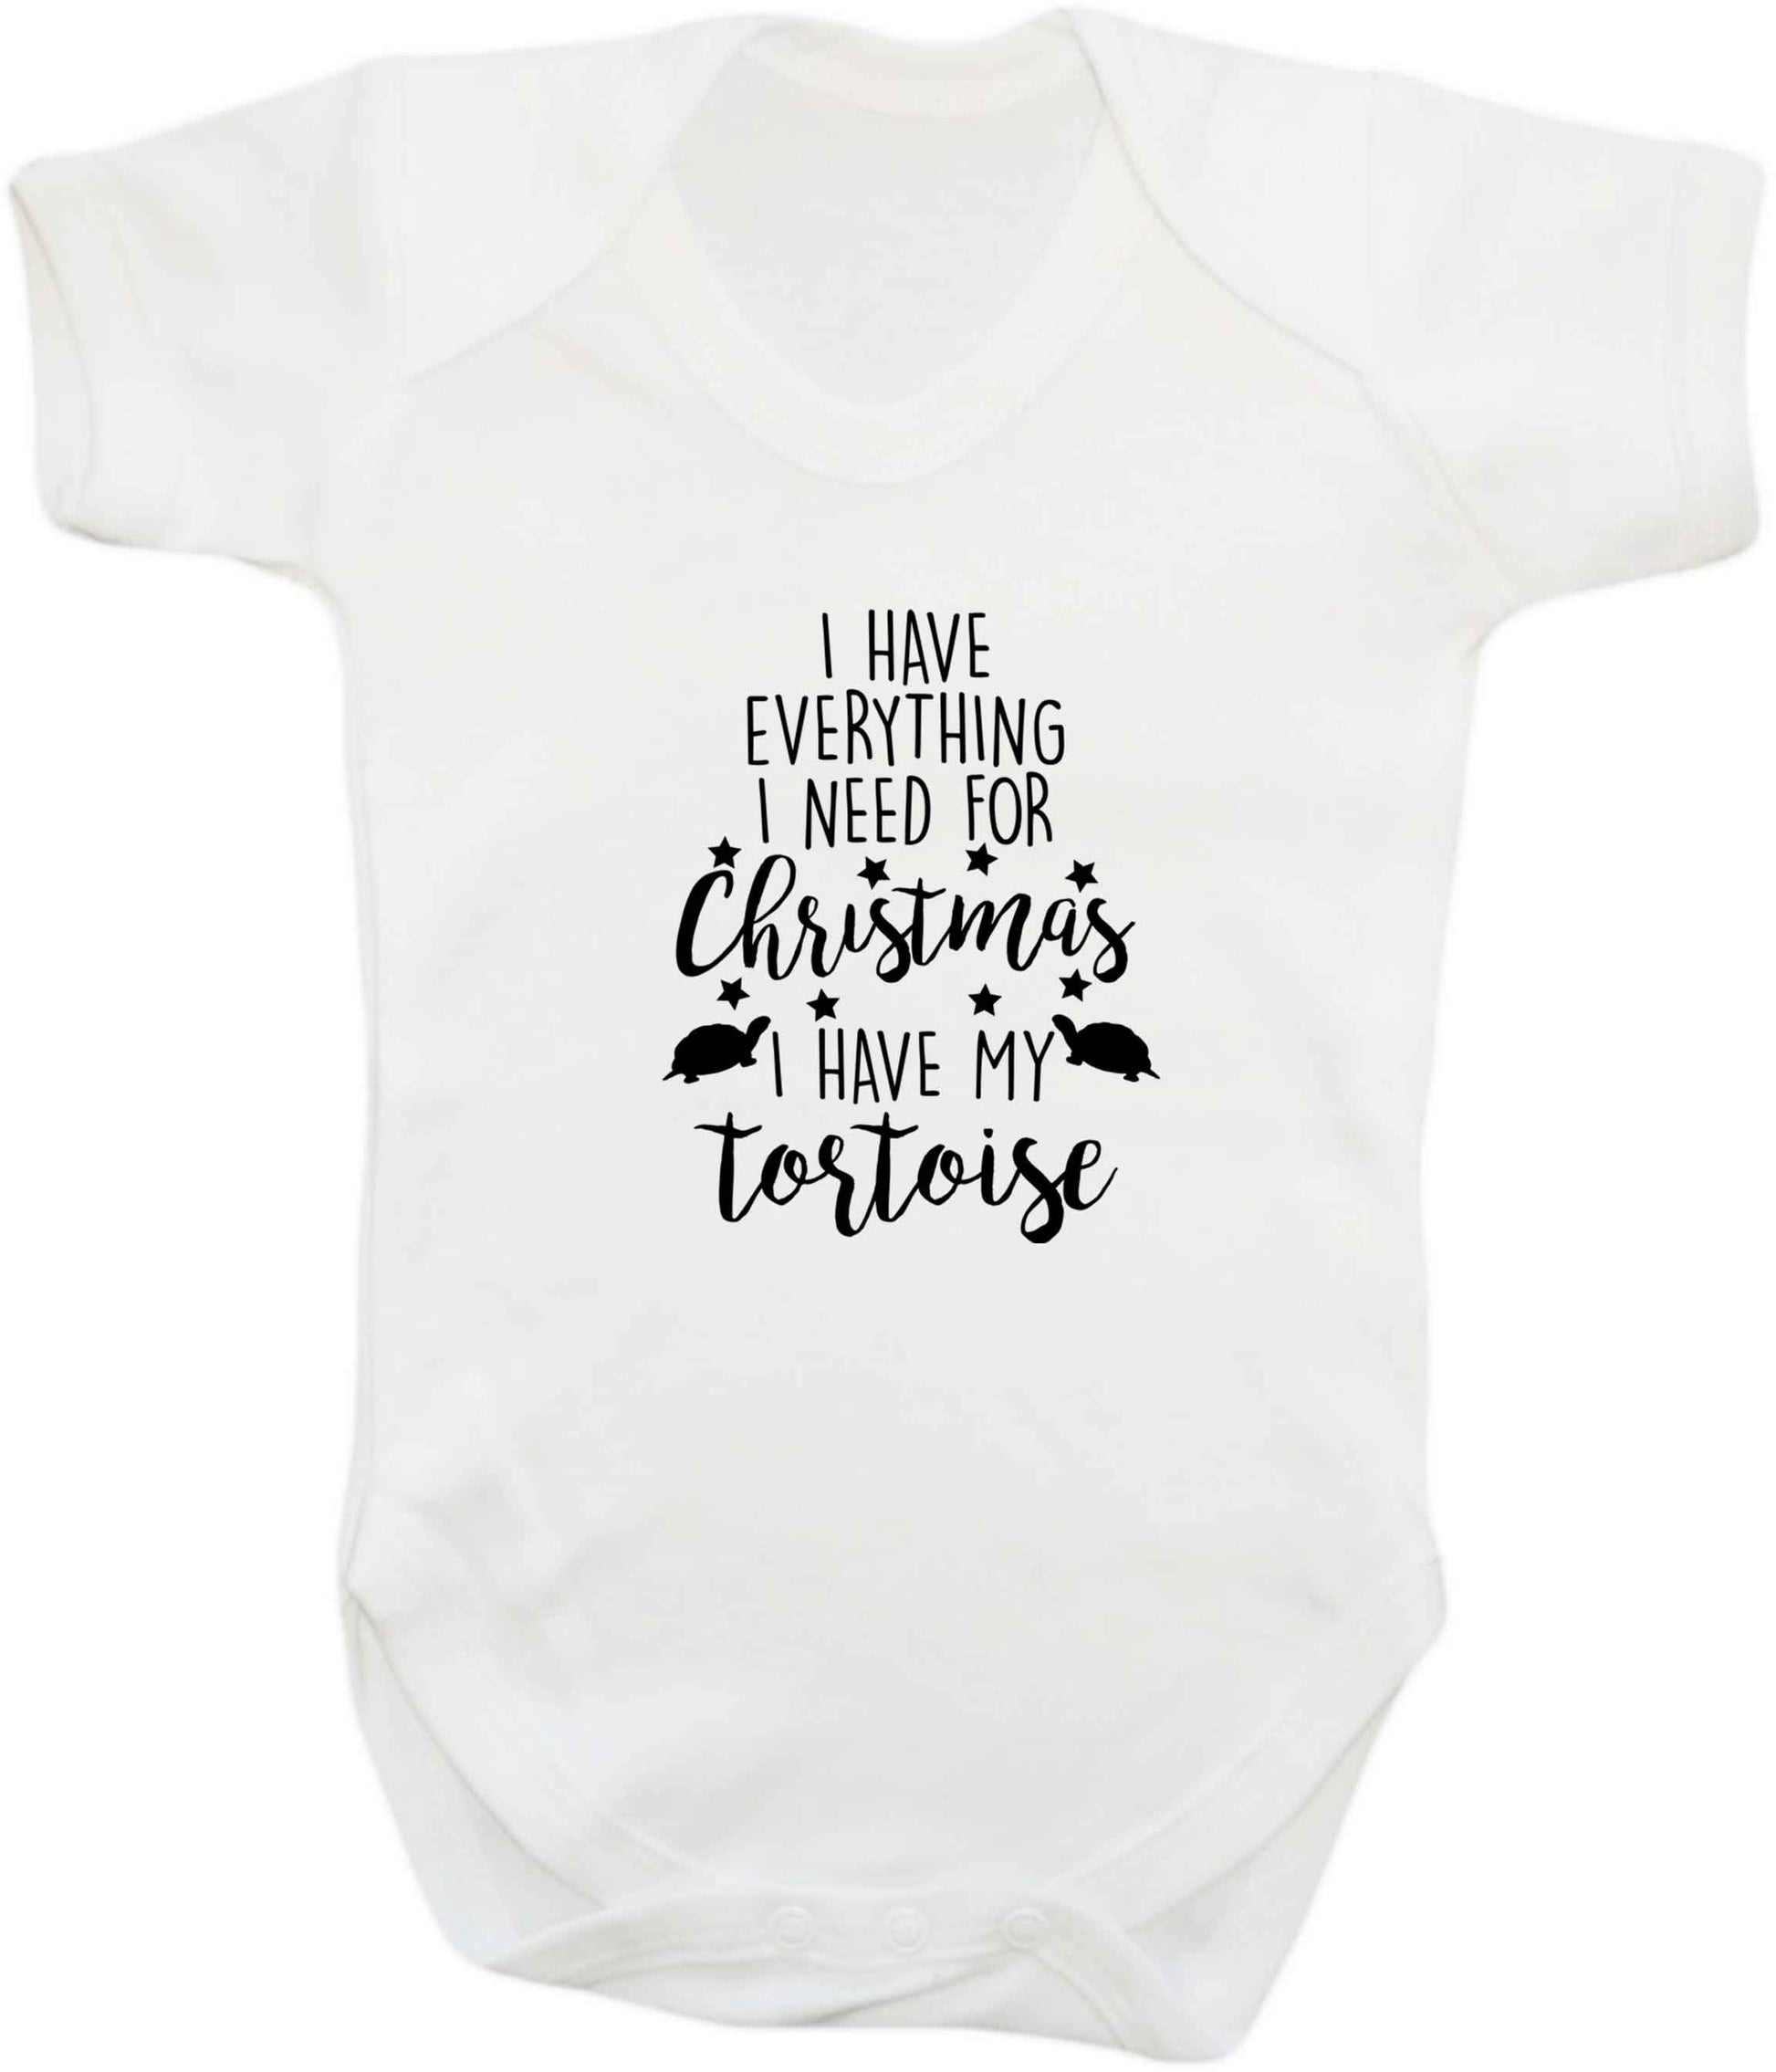 I have everything I need for Christmas I have my tortoise baby vest white 18-24 months